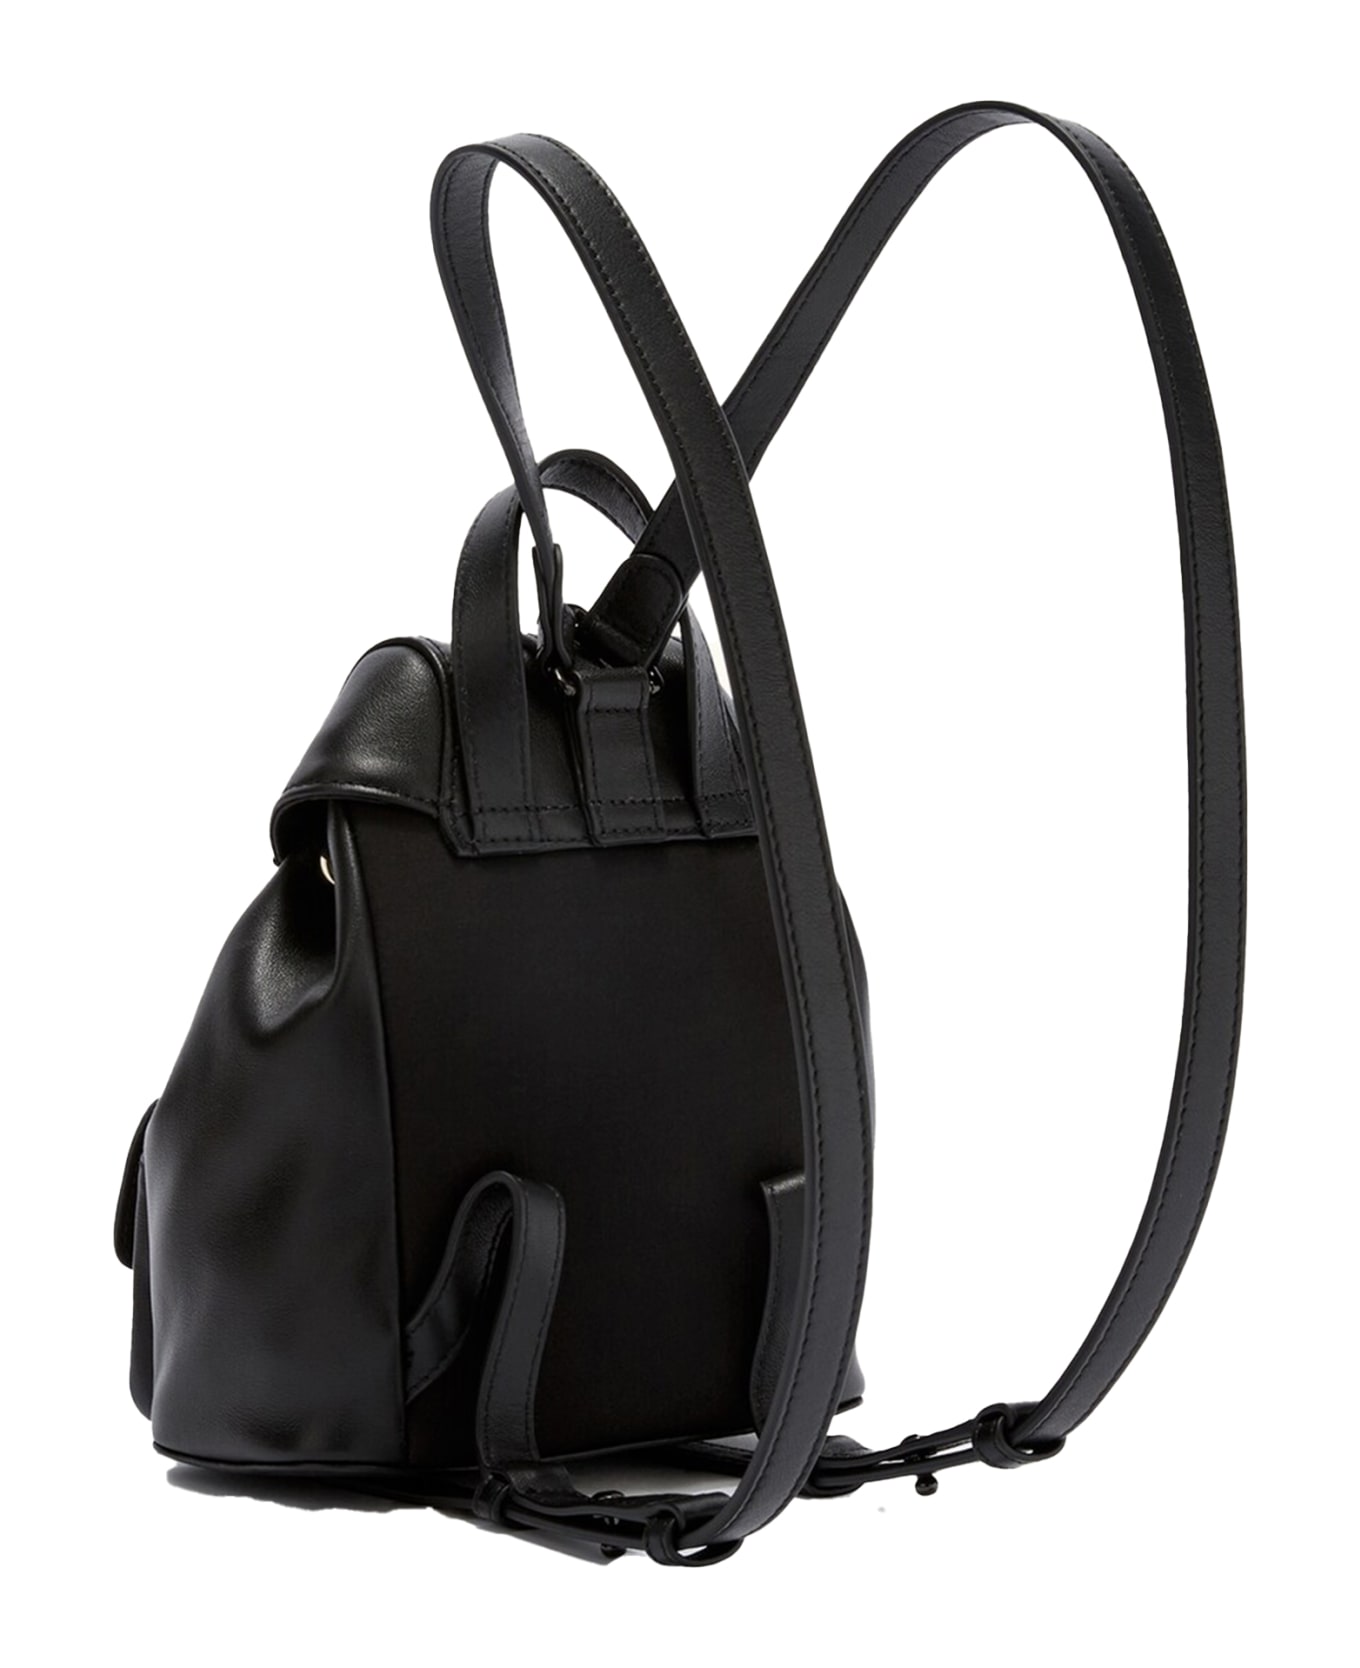 Furla Flow Mini White Leather Backpack - NERO バックパック